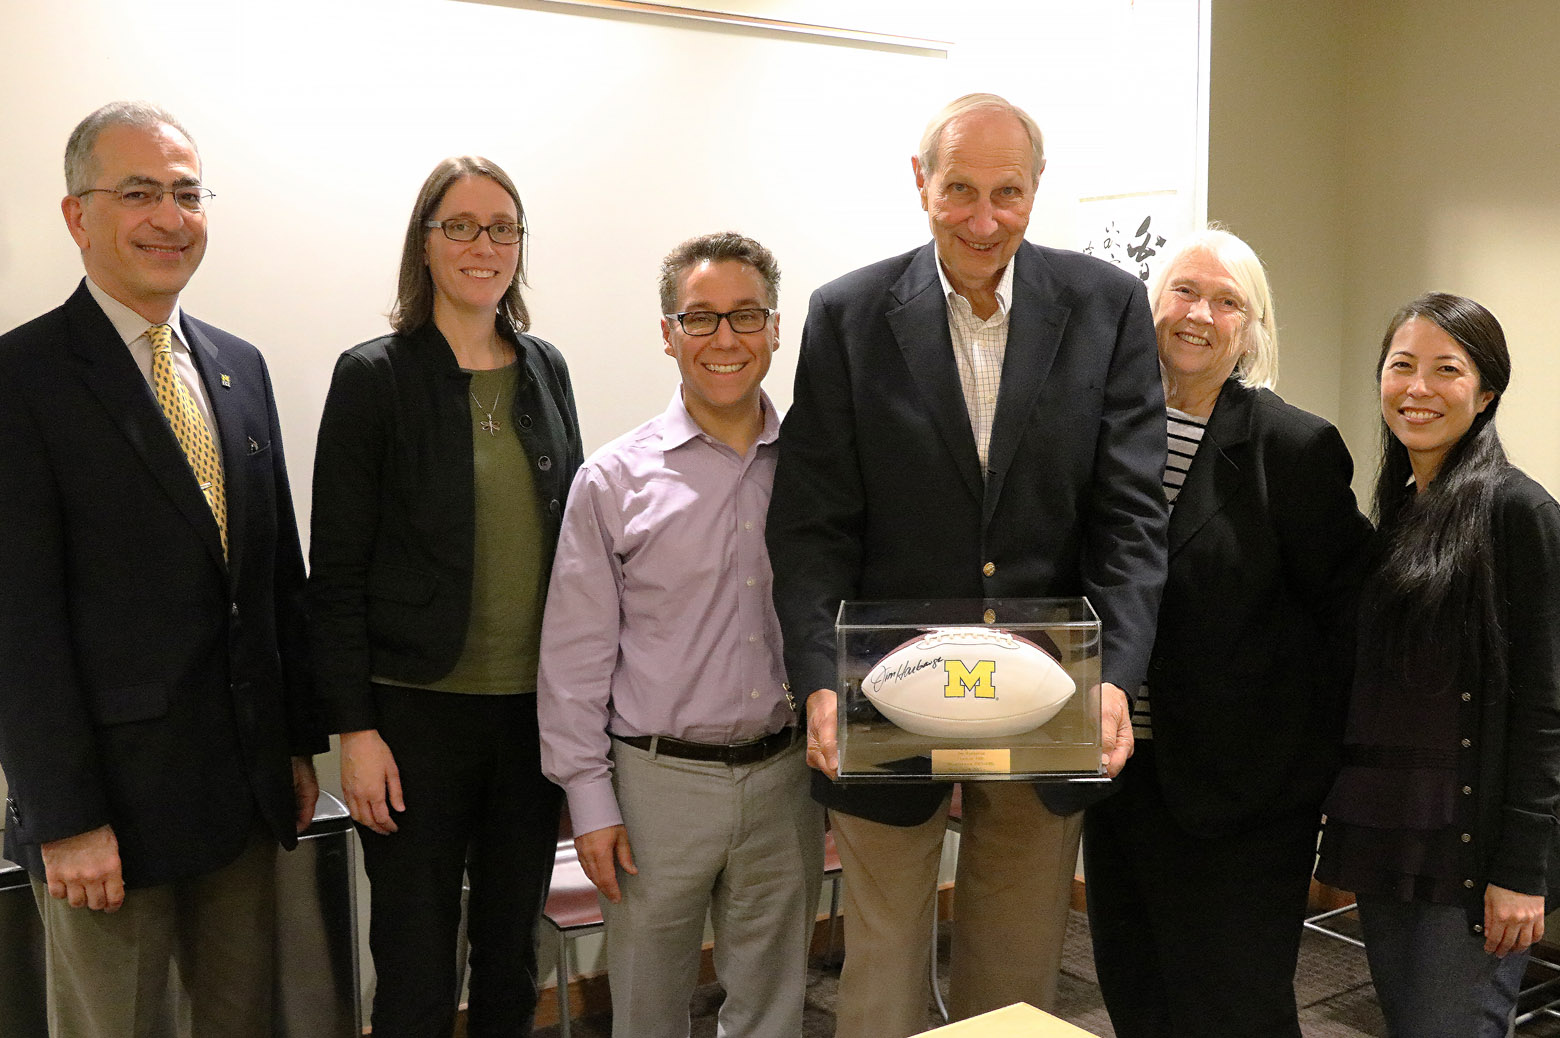 Peter and Evelyn Fuss visited campus for Homecoming in 2016. From left: Khalil Najafi (Peter and Evelyn Fuss Endowed Chair of ECE), Prof. Becky Peterson, Prof. Tony Grbic, Peter Fuss, Evelyn Fuss, Prof. Somin Eunice Lee.